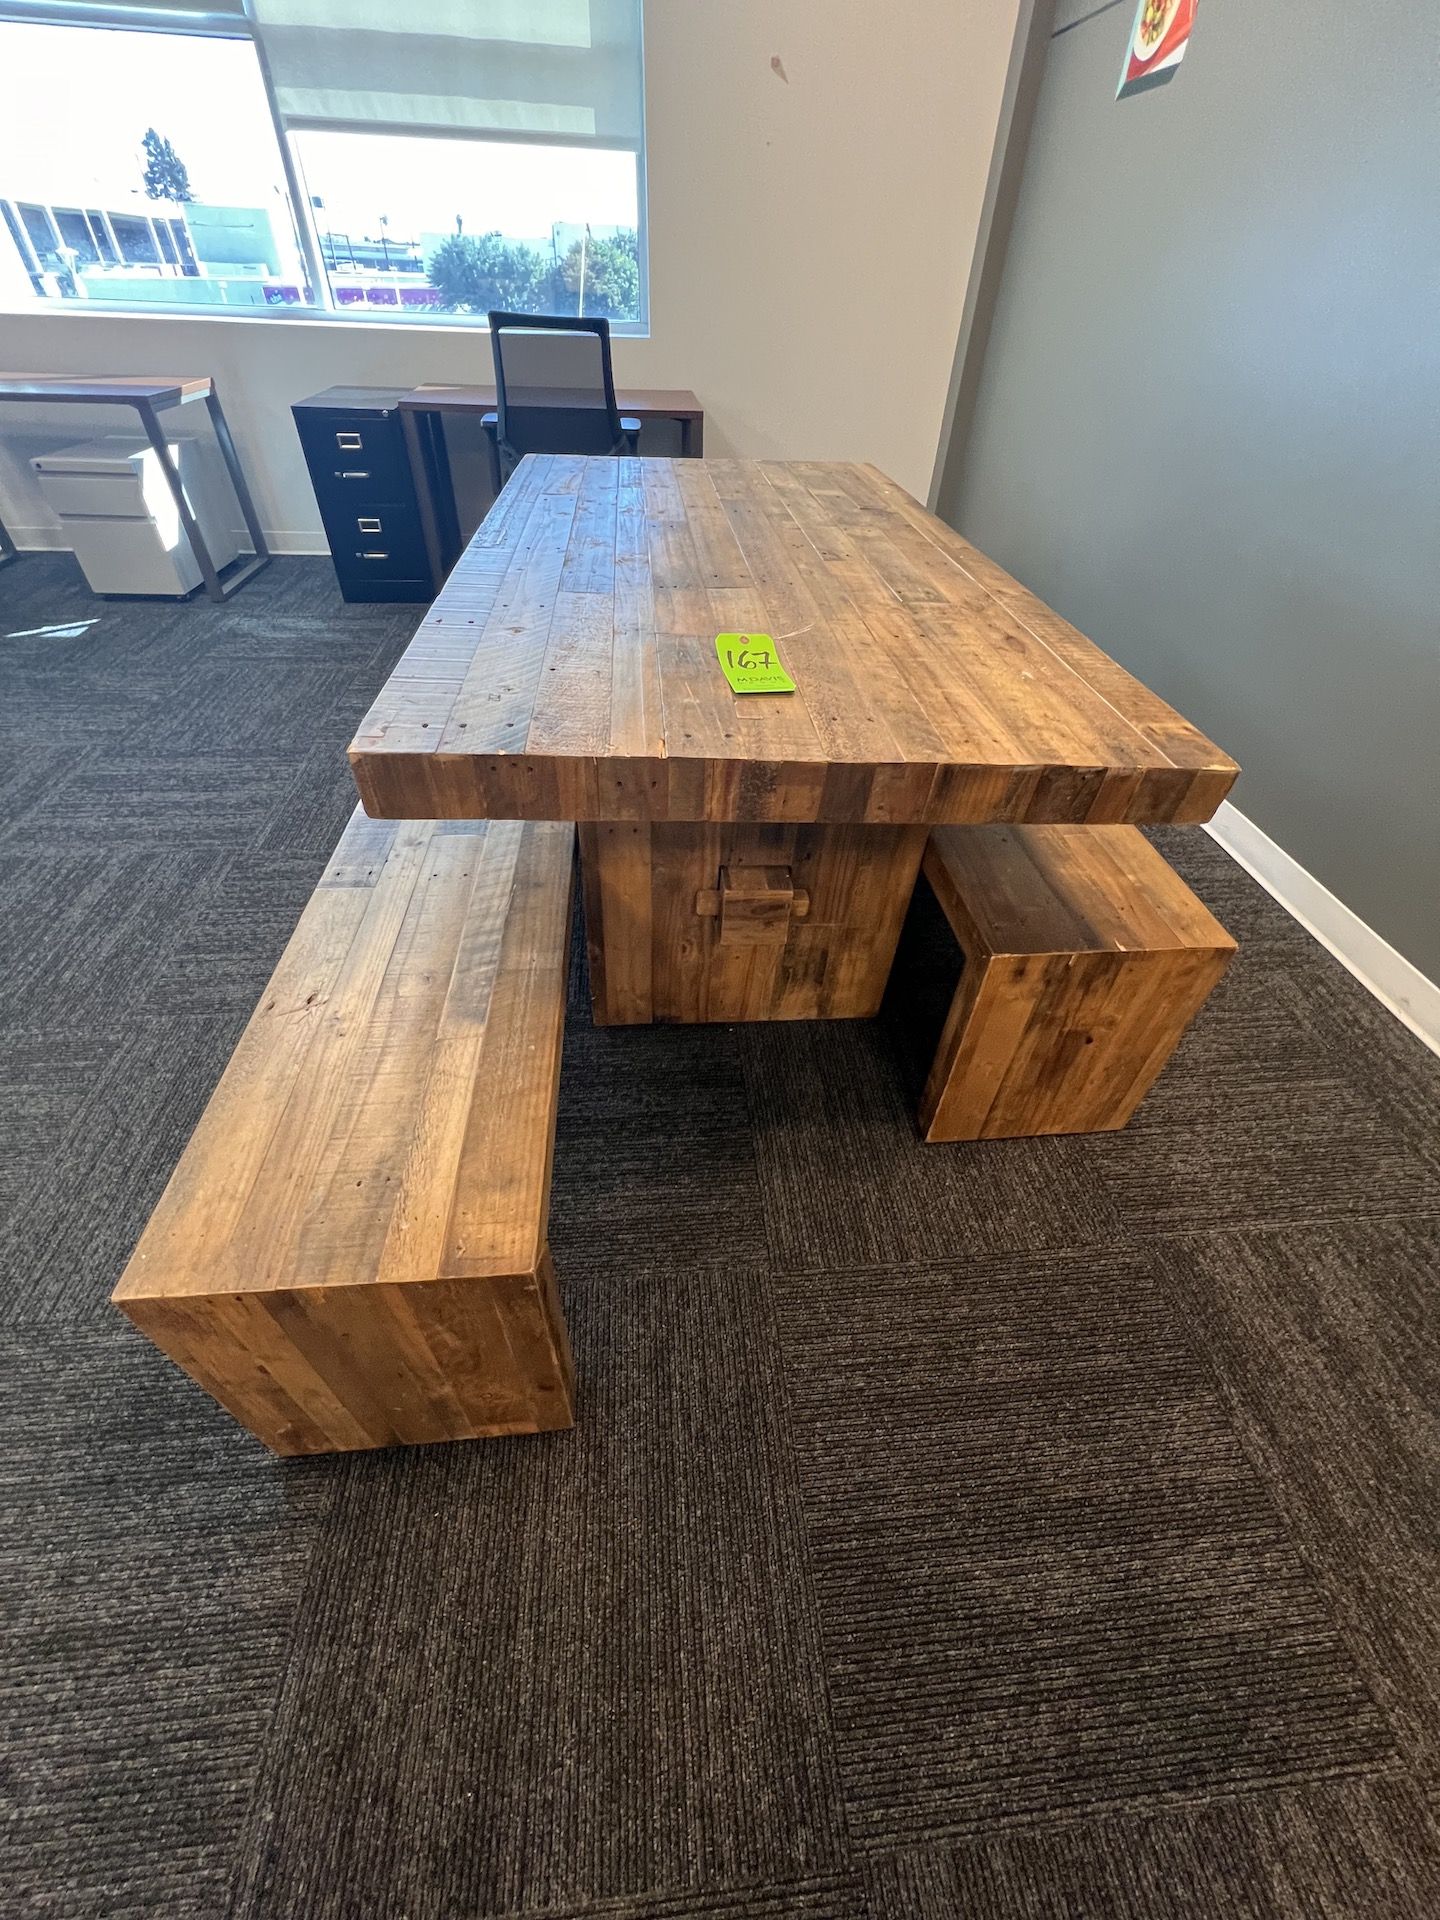 WOOD TABLE WITH WOOD STOOLS (RIGGING & SIMPLE LOADING FEE $100.00) (NOTE: DOES NOT INCLUDE SKIDDING